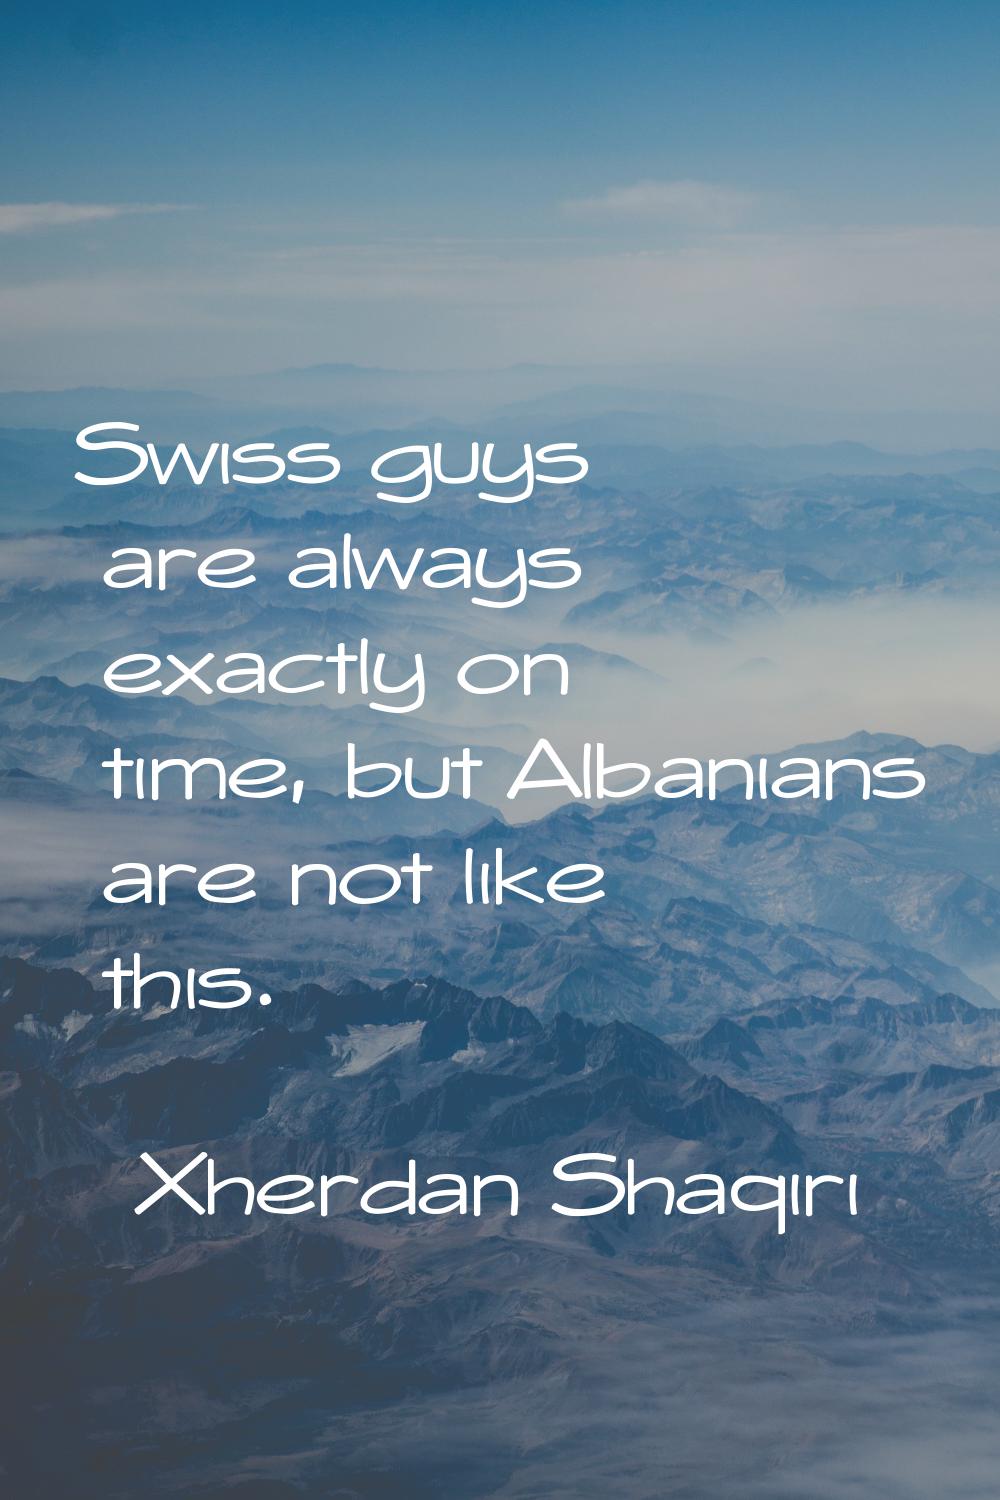 Swiss guys are always exactly on time, but Albanians are not like this.